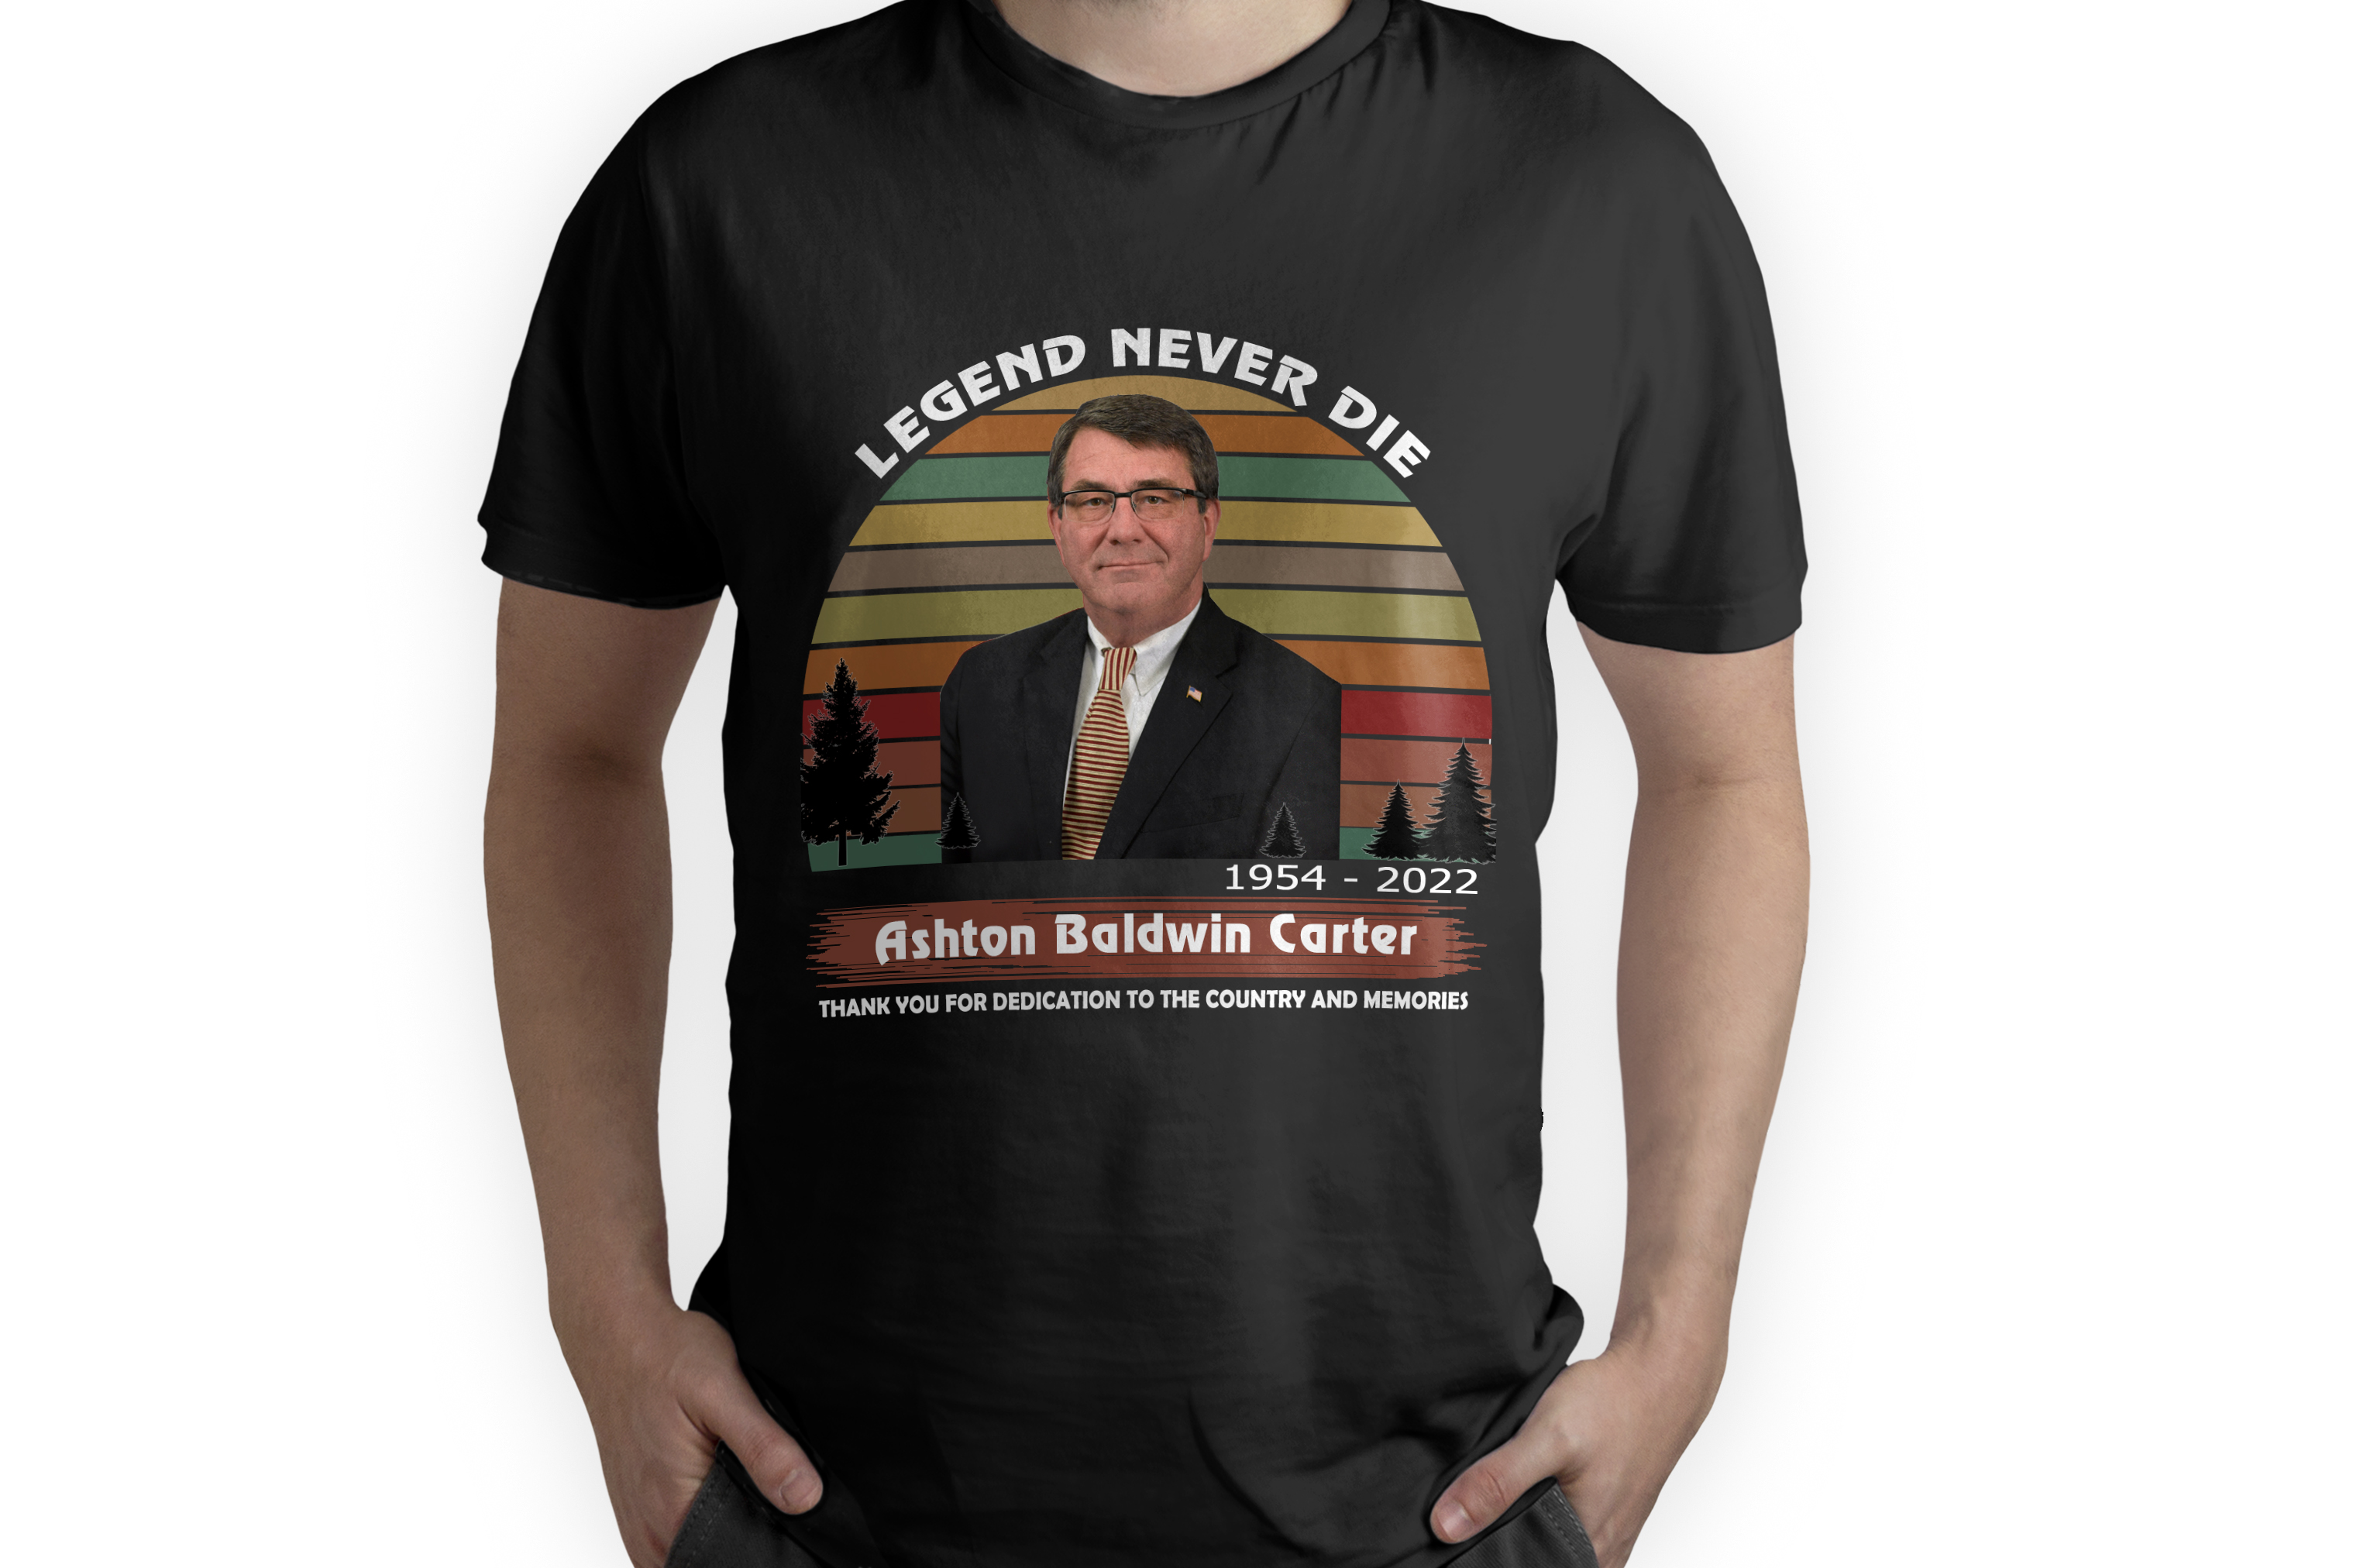 Ash Carter Shirts - Thank You For Dedication To The Country And Memories Shirt Full Size Up To 5xl | Trending Shirts